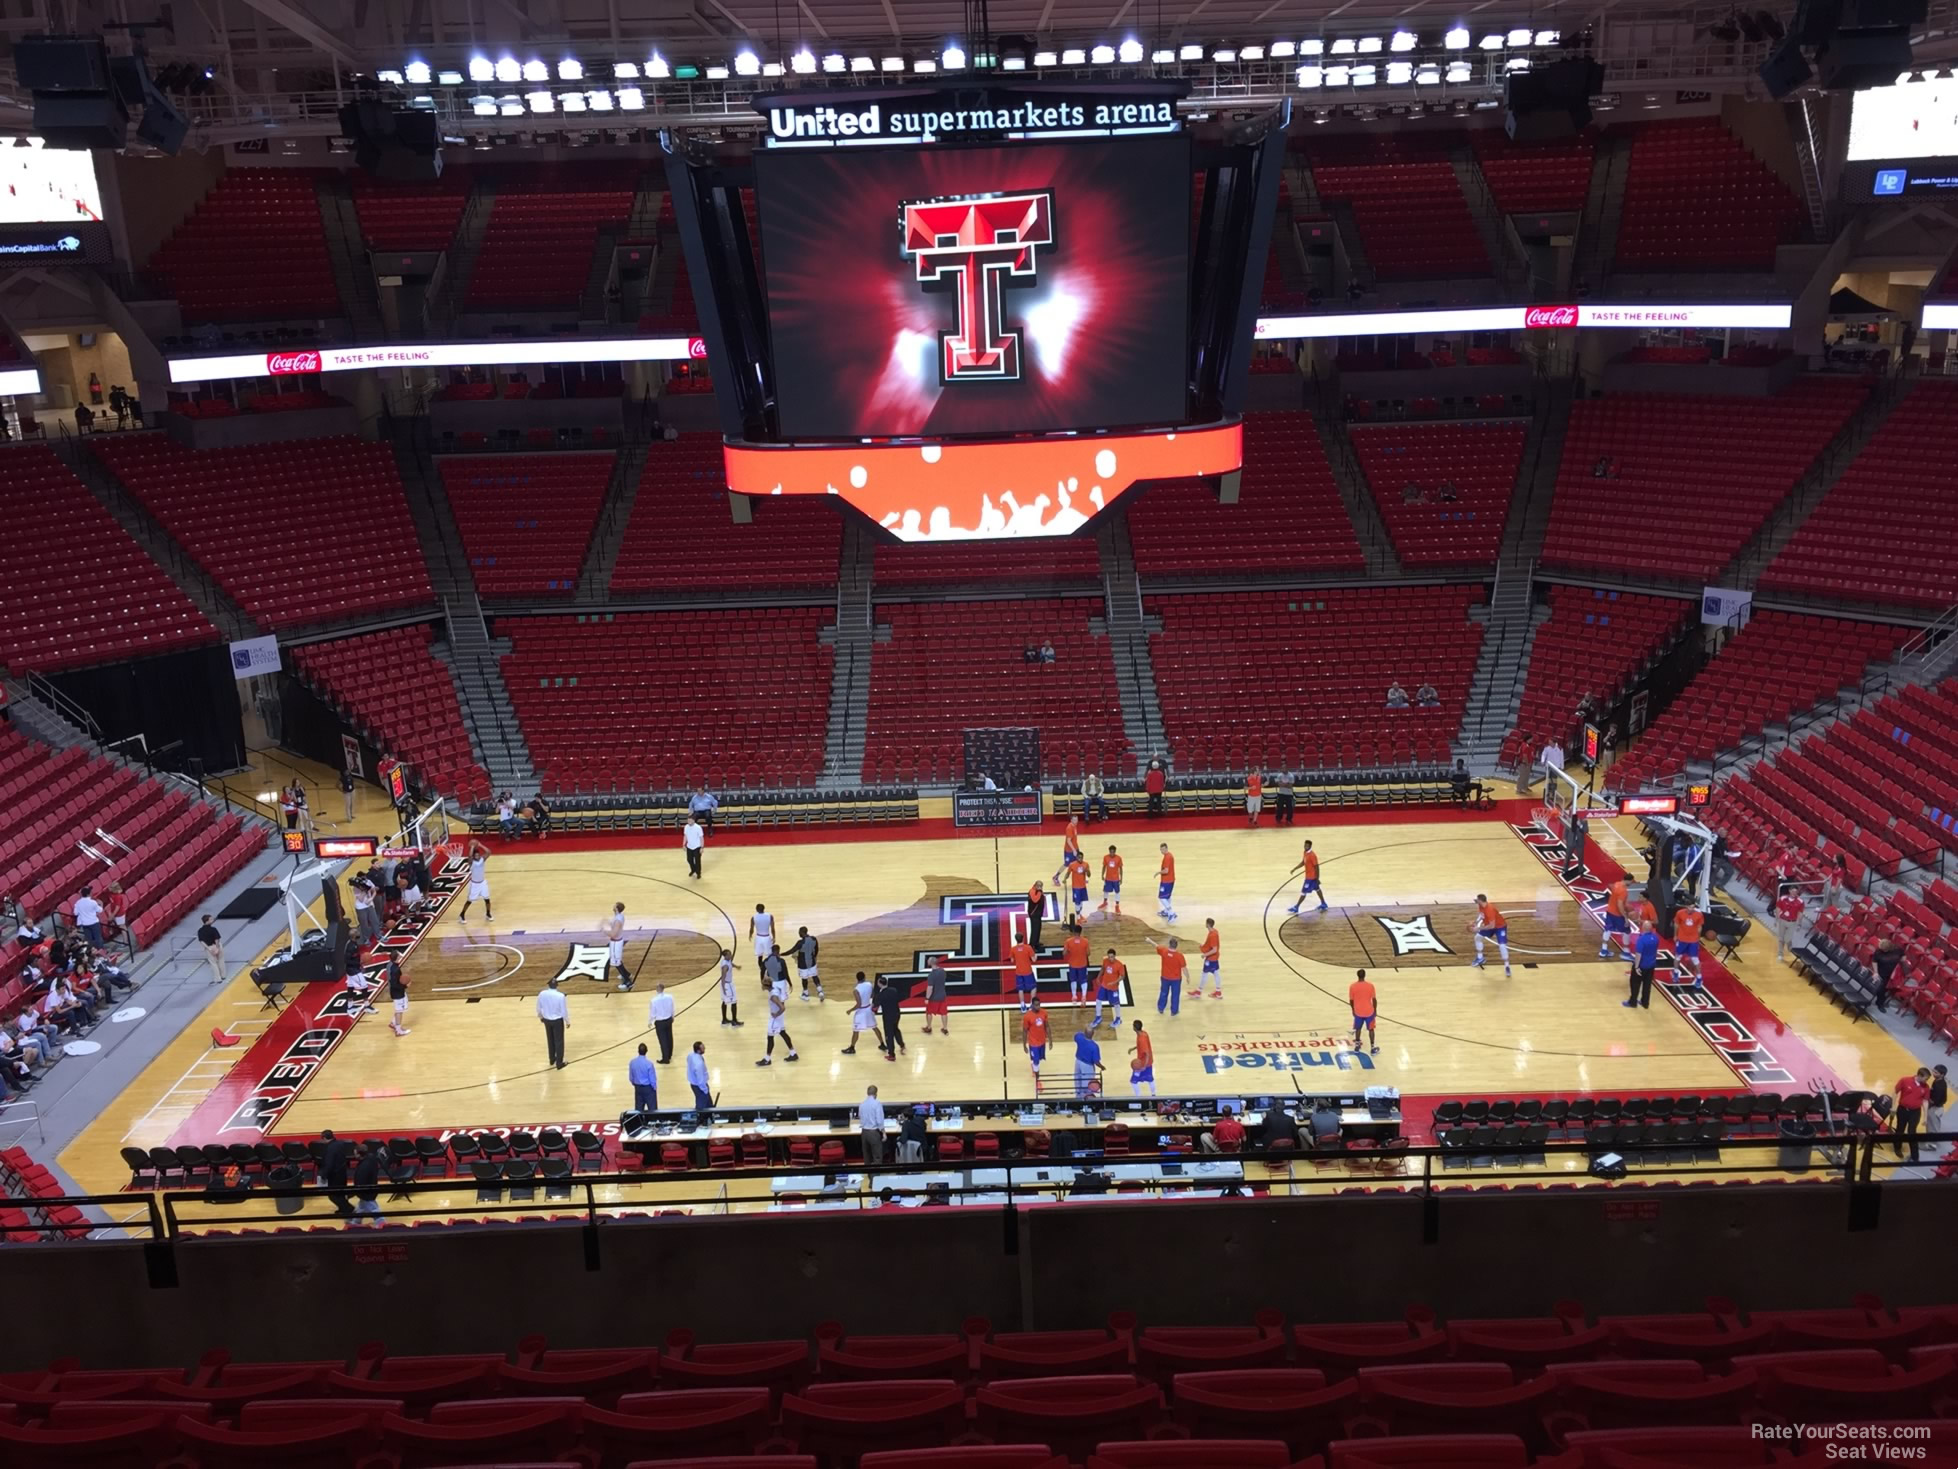 section 217, row 7 seat view  - united supermarkets arena